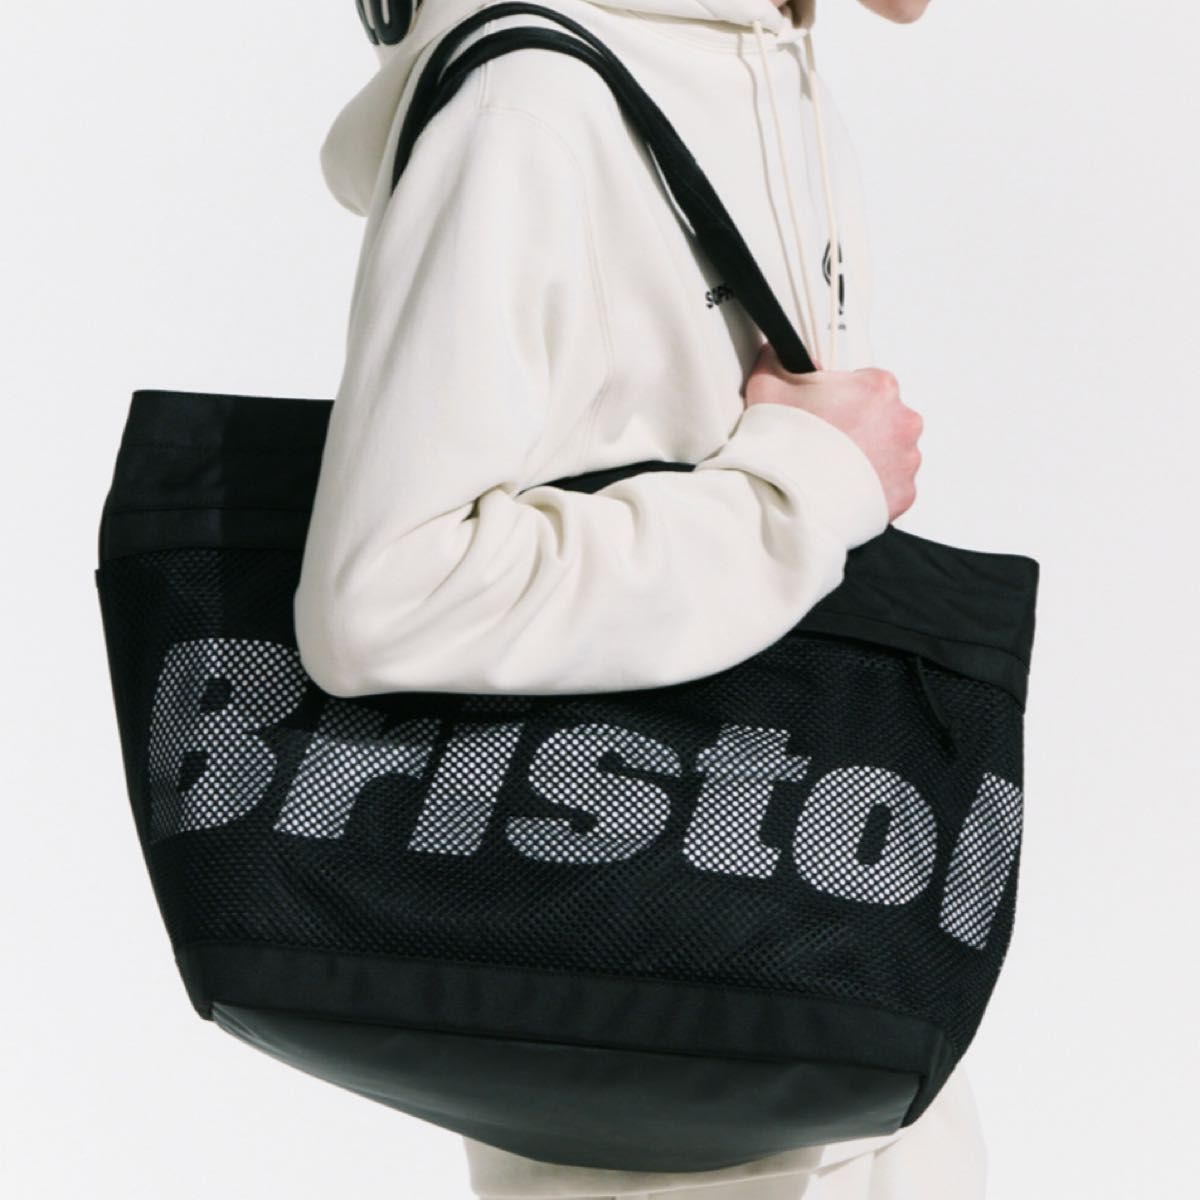 FCRB 23SS NEW ERA GYM TOTE BAG｜PayPayフリマ